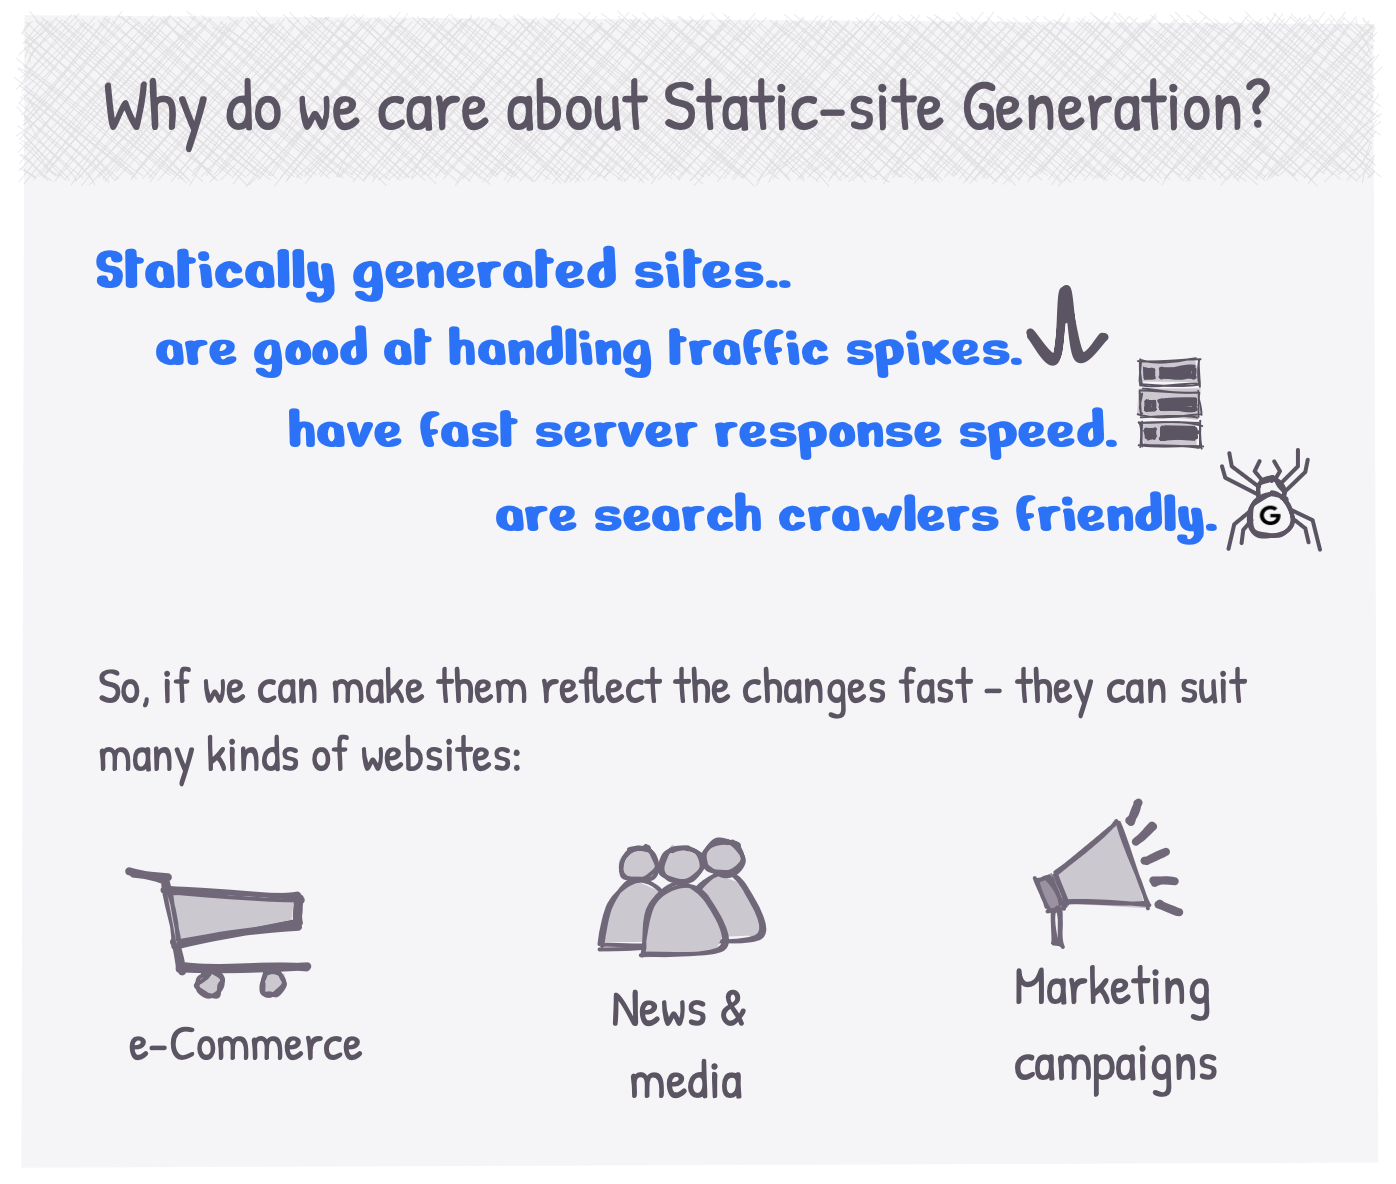 Why do we care about Static site generation?